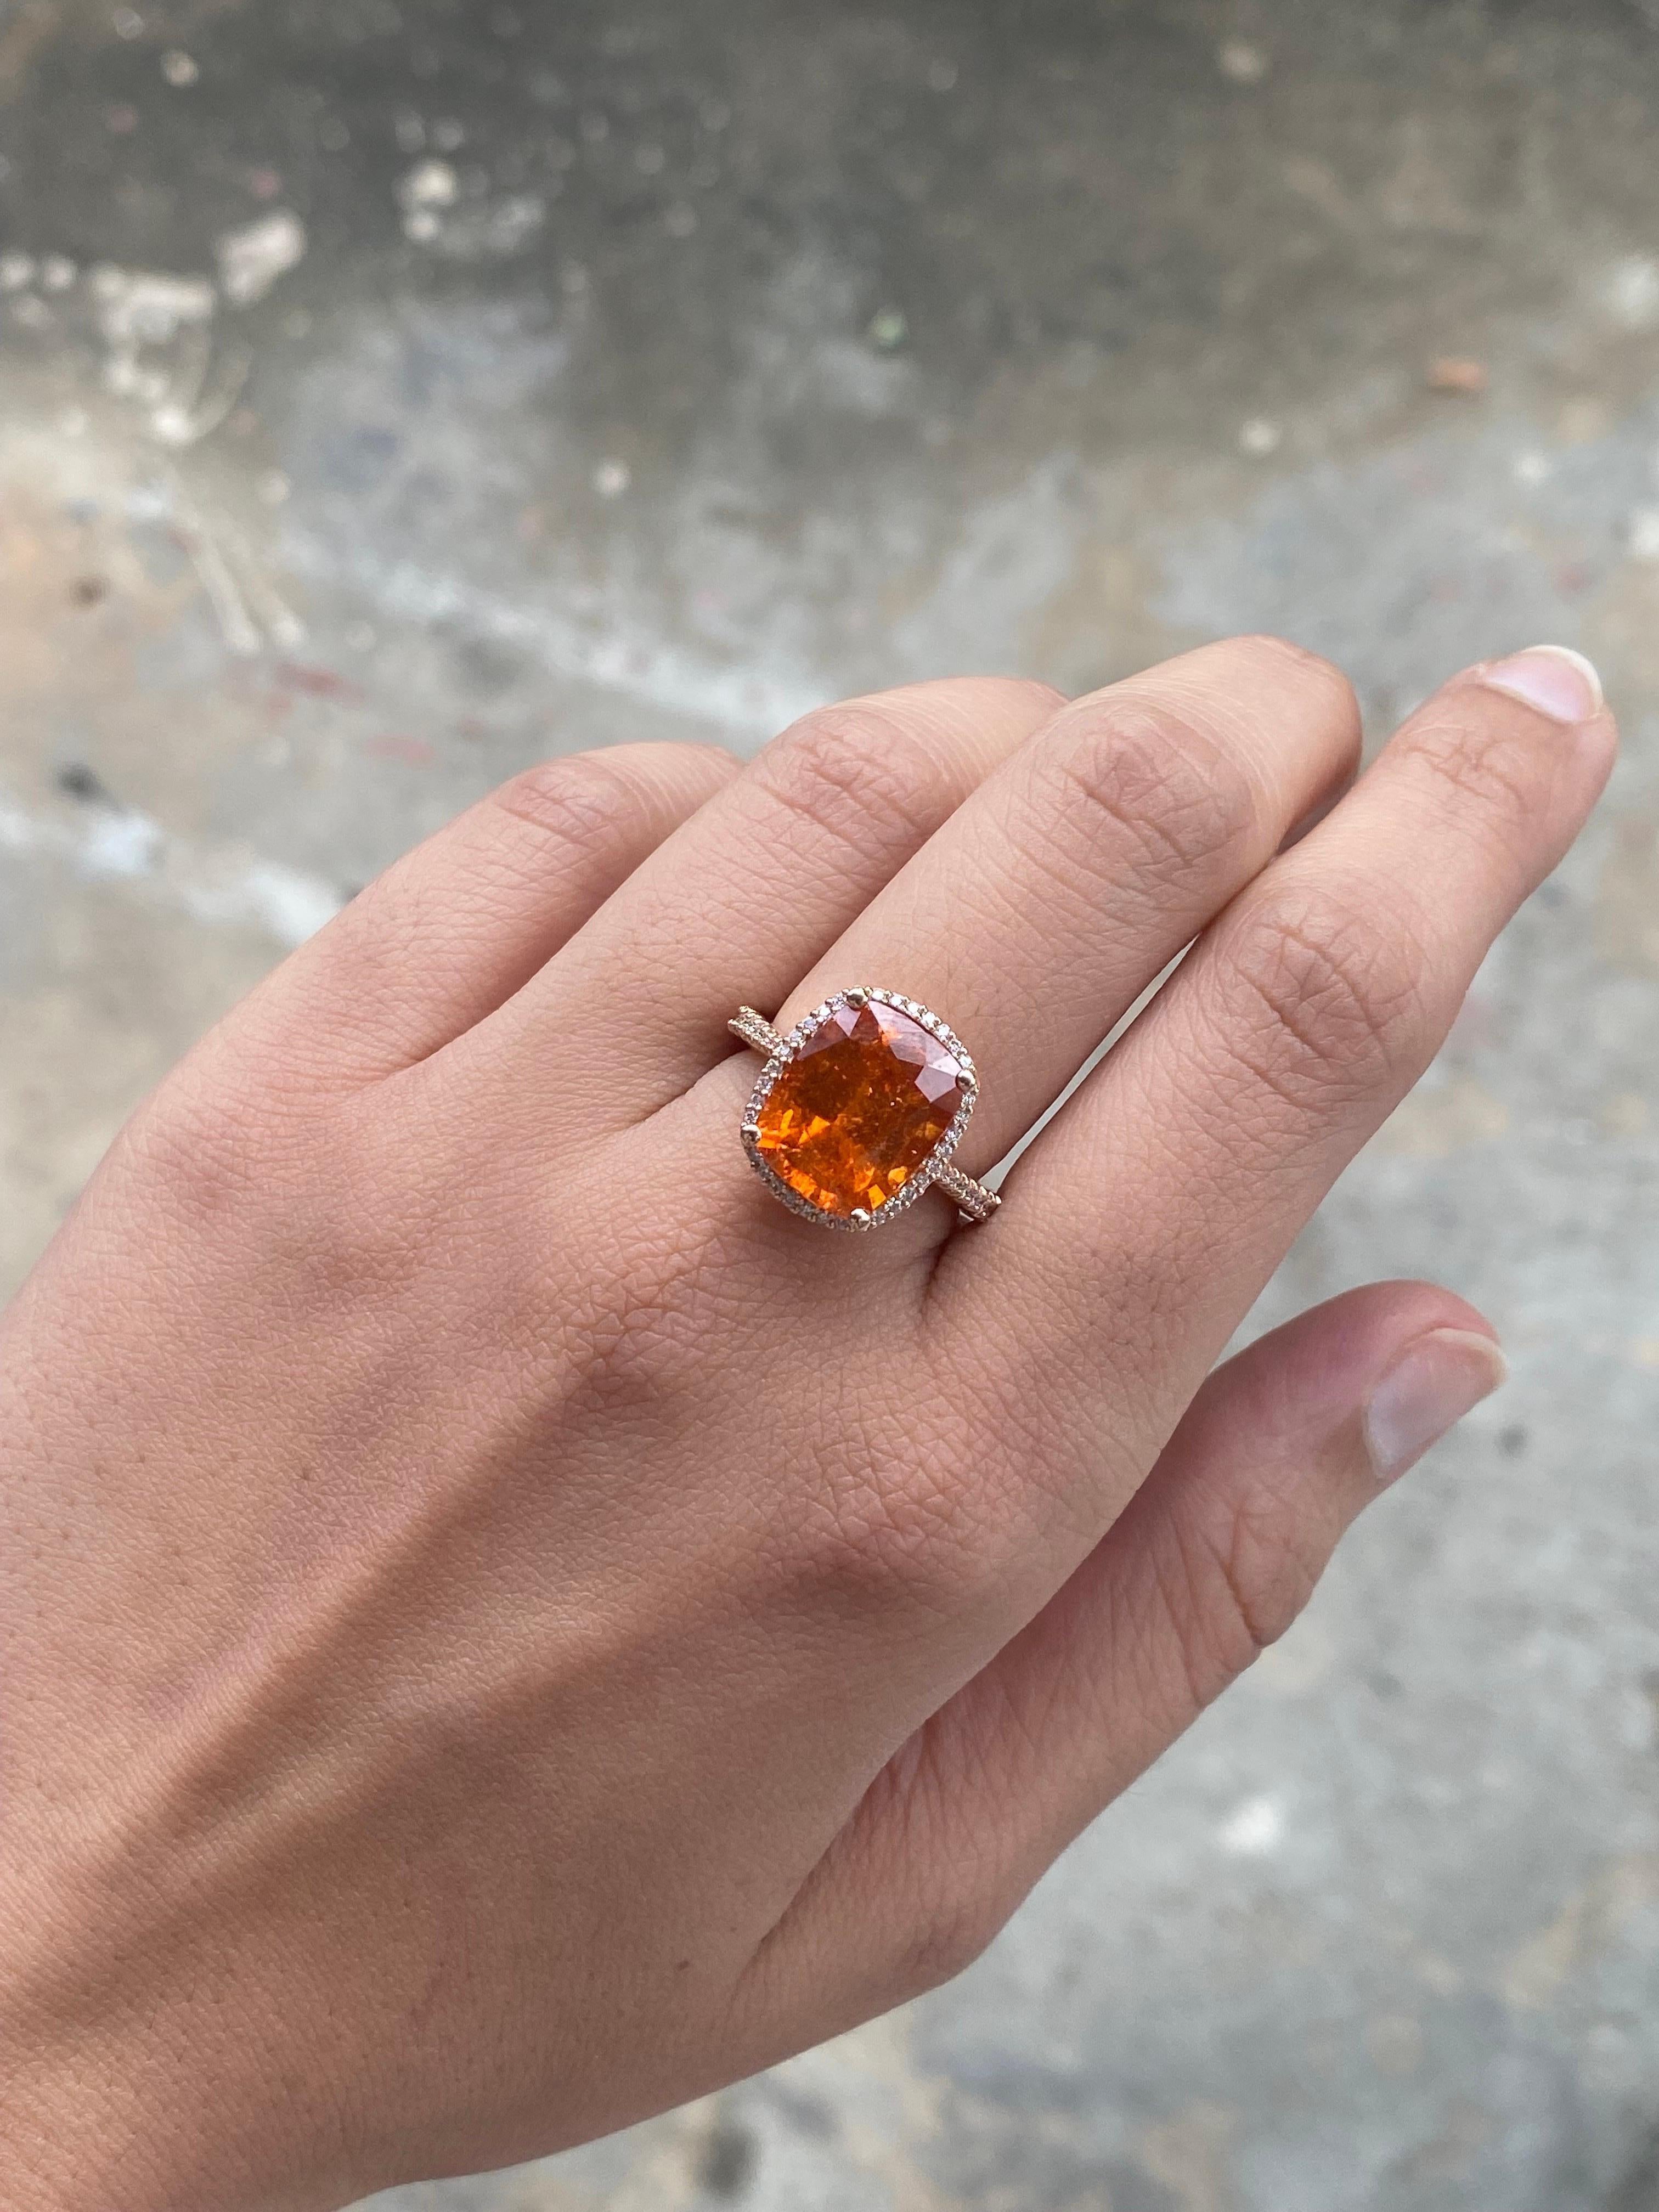 A beautiful natural 8.20 Carat Mandarin Garnet Spessartine centre stone, with a White Diamond halo, all set in solid 18K Rose Gold. The Mandarin Garnet is transparent, with few naturally occuring inclusions, vivd orange color and great luster. The